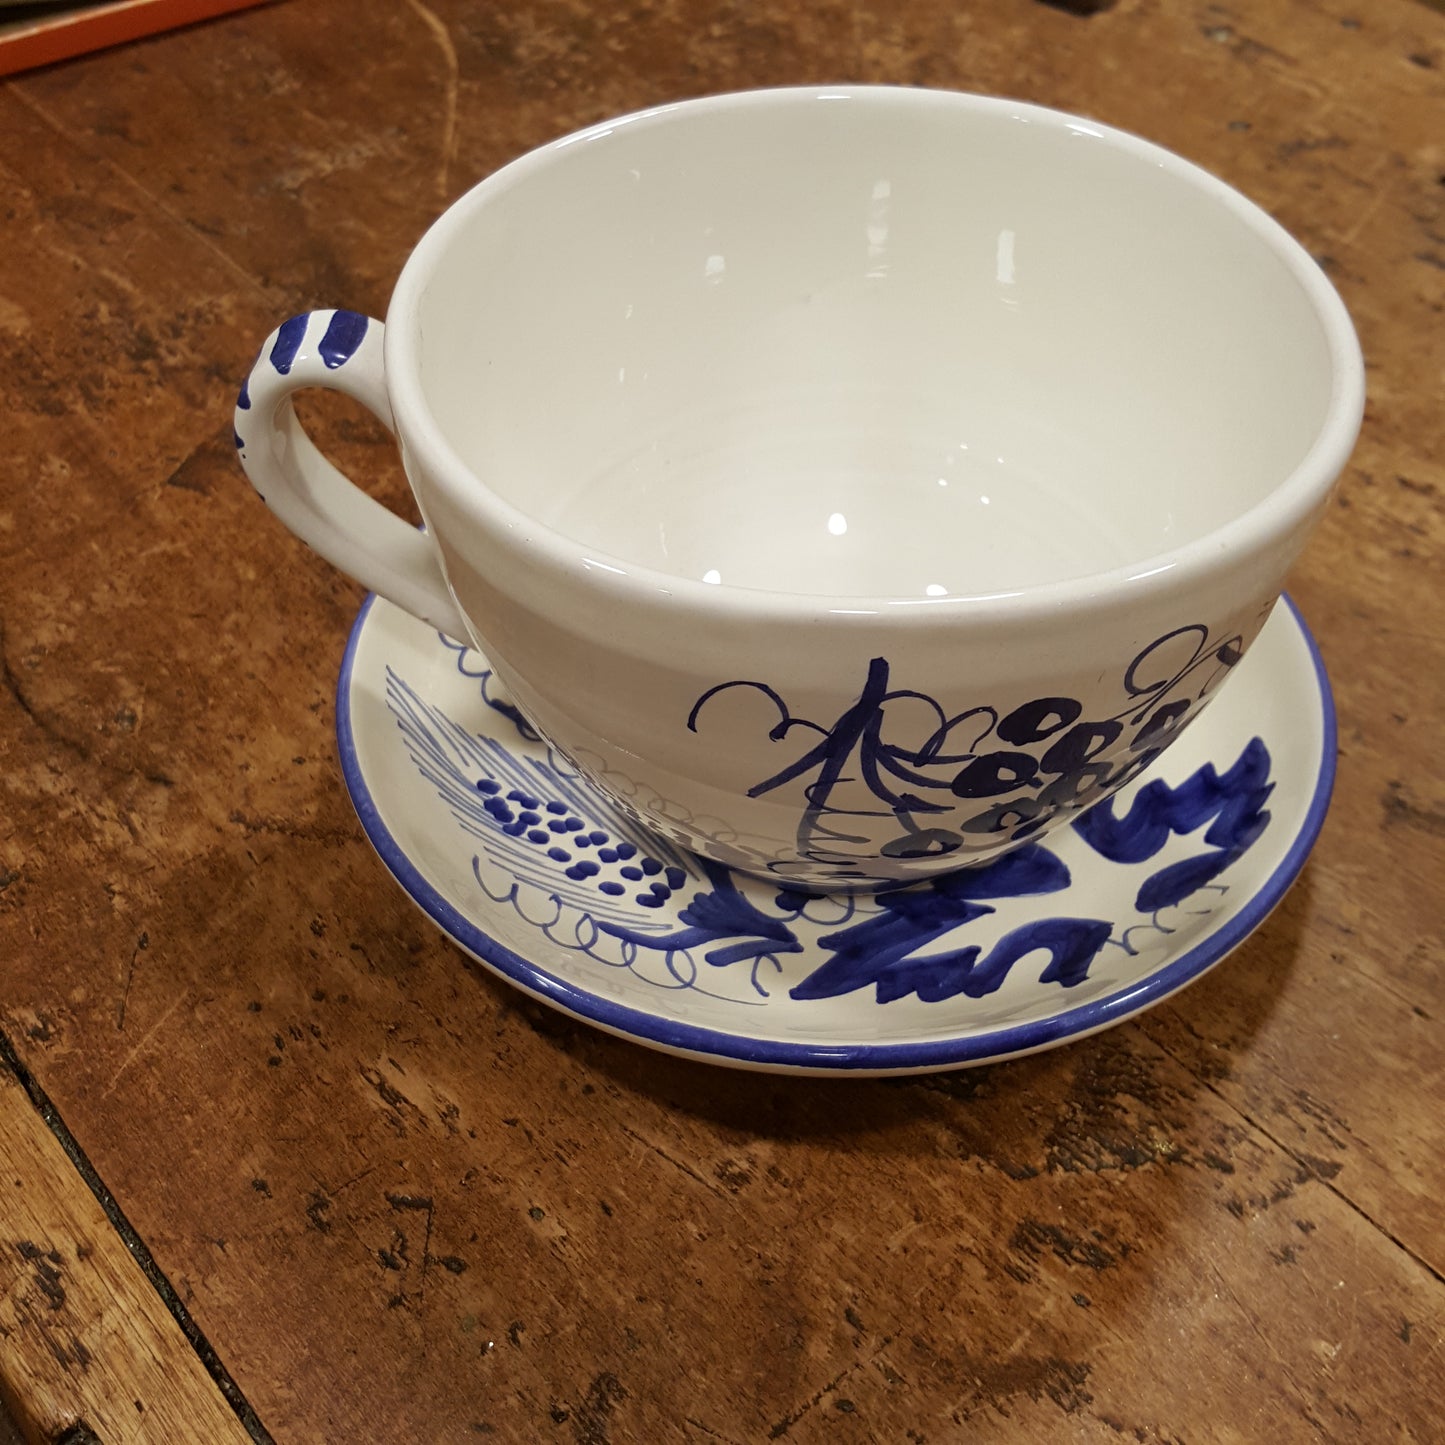 Ceramic breakfast cup with handle